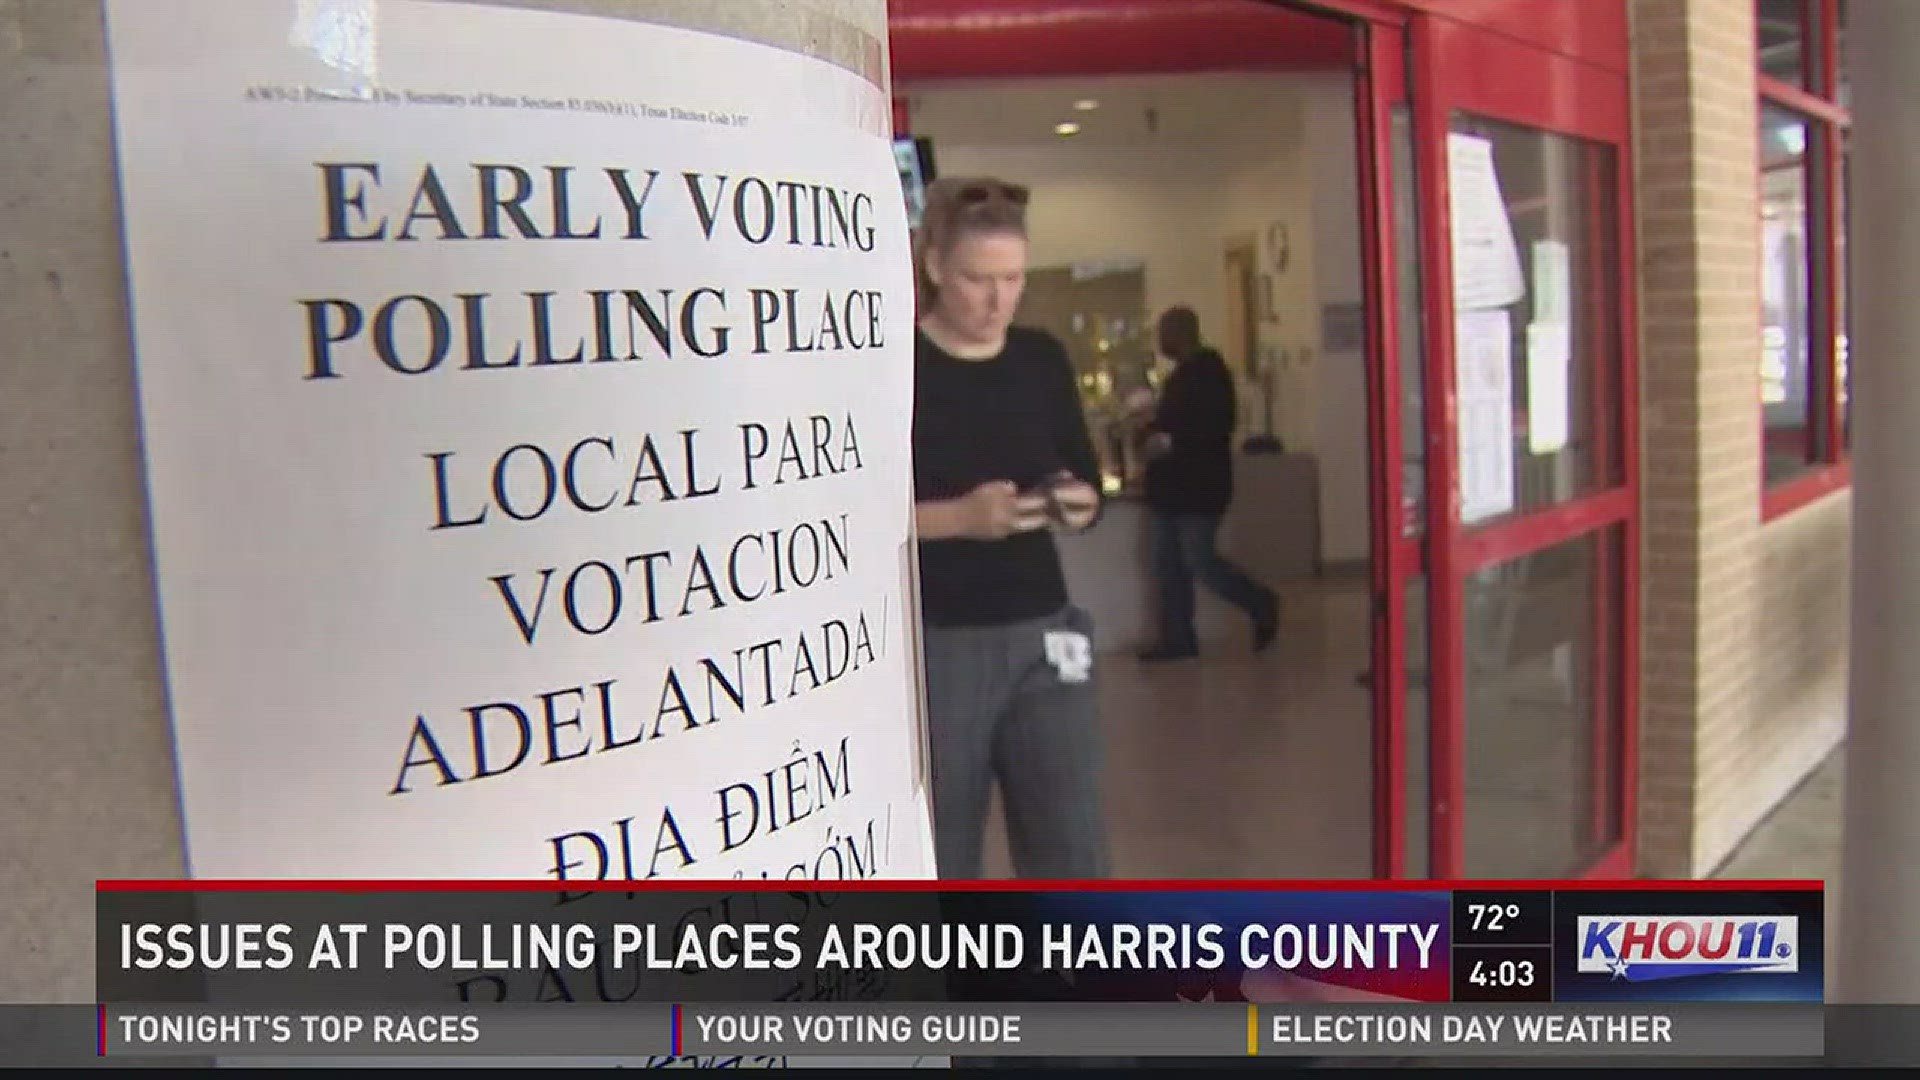 Voters experienced problems at several polling places across the county, but Harris County's election judge said the issues were isolated.